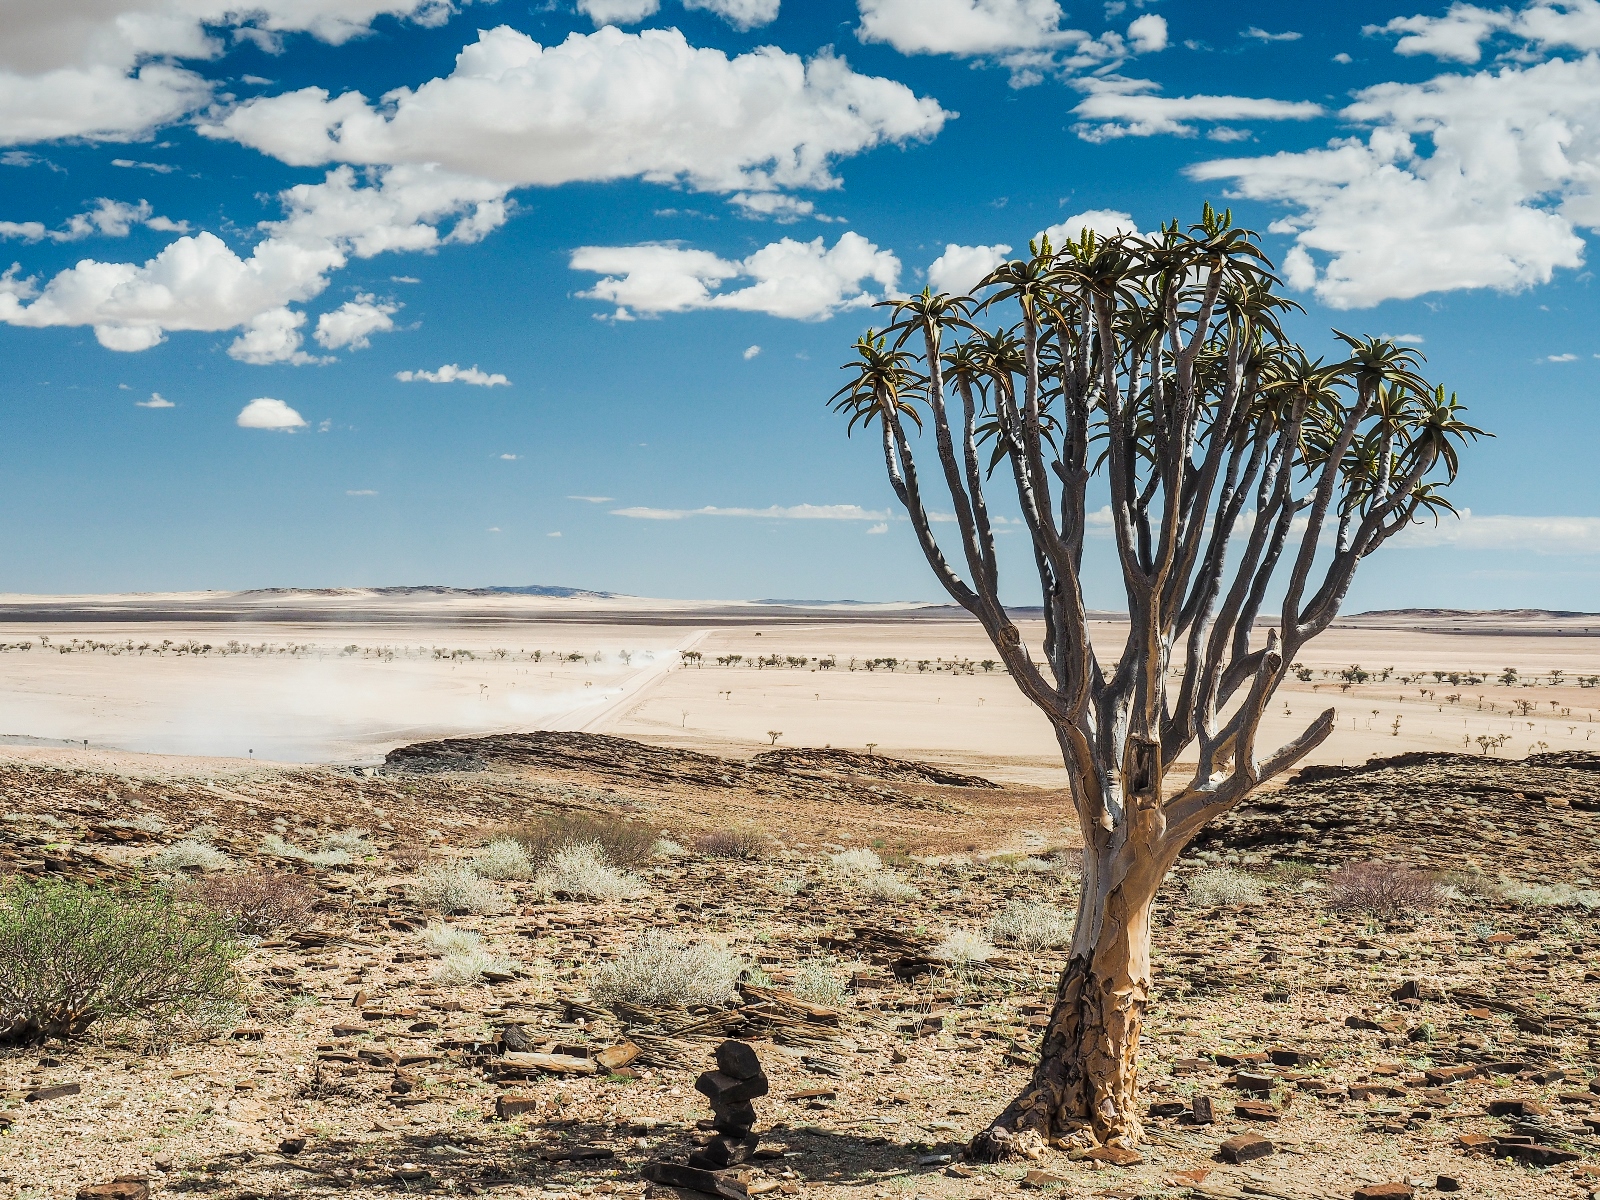 Quiver tree in Namibian landscape